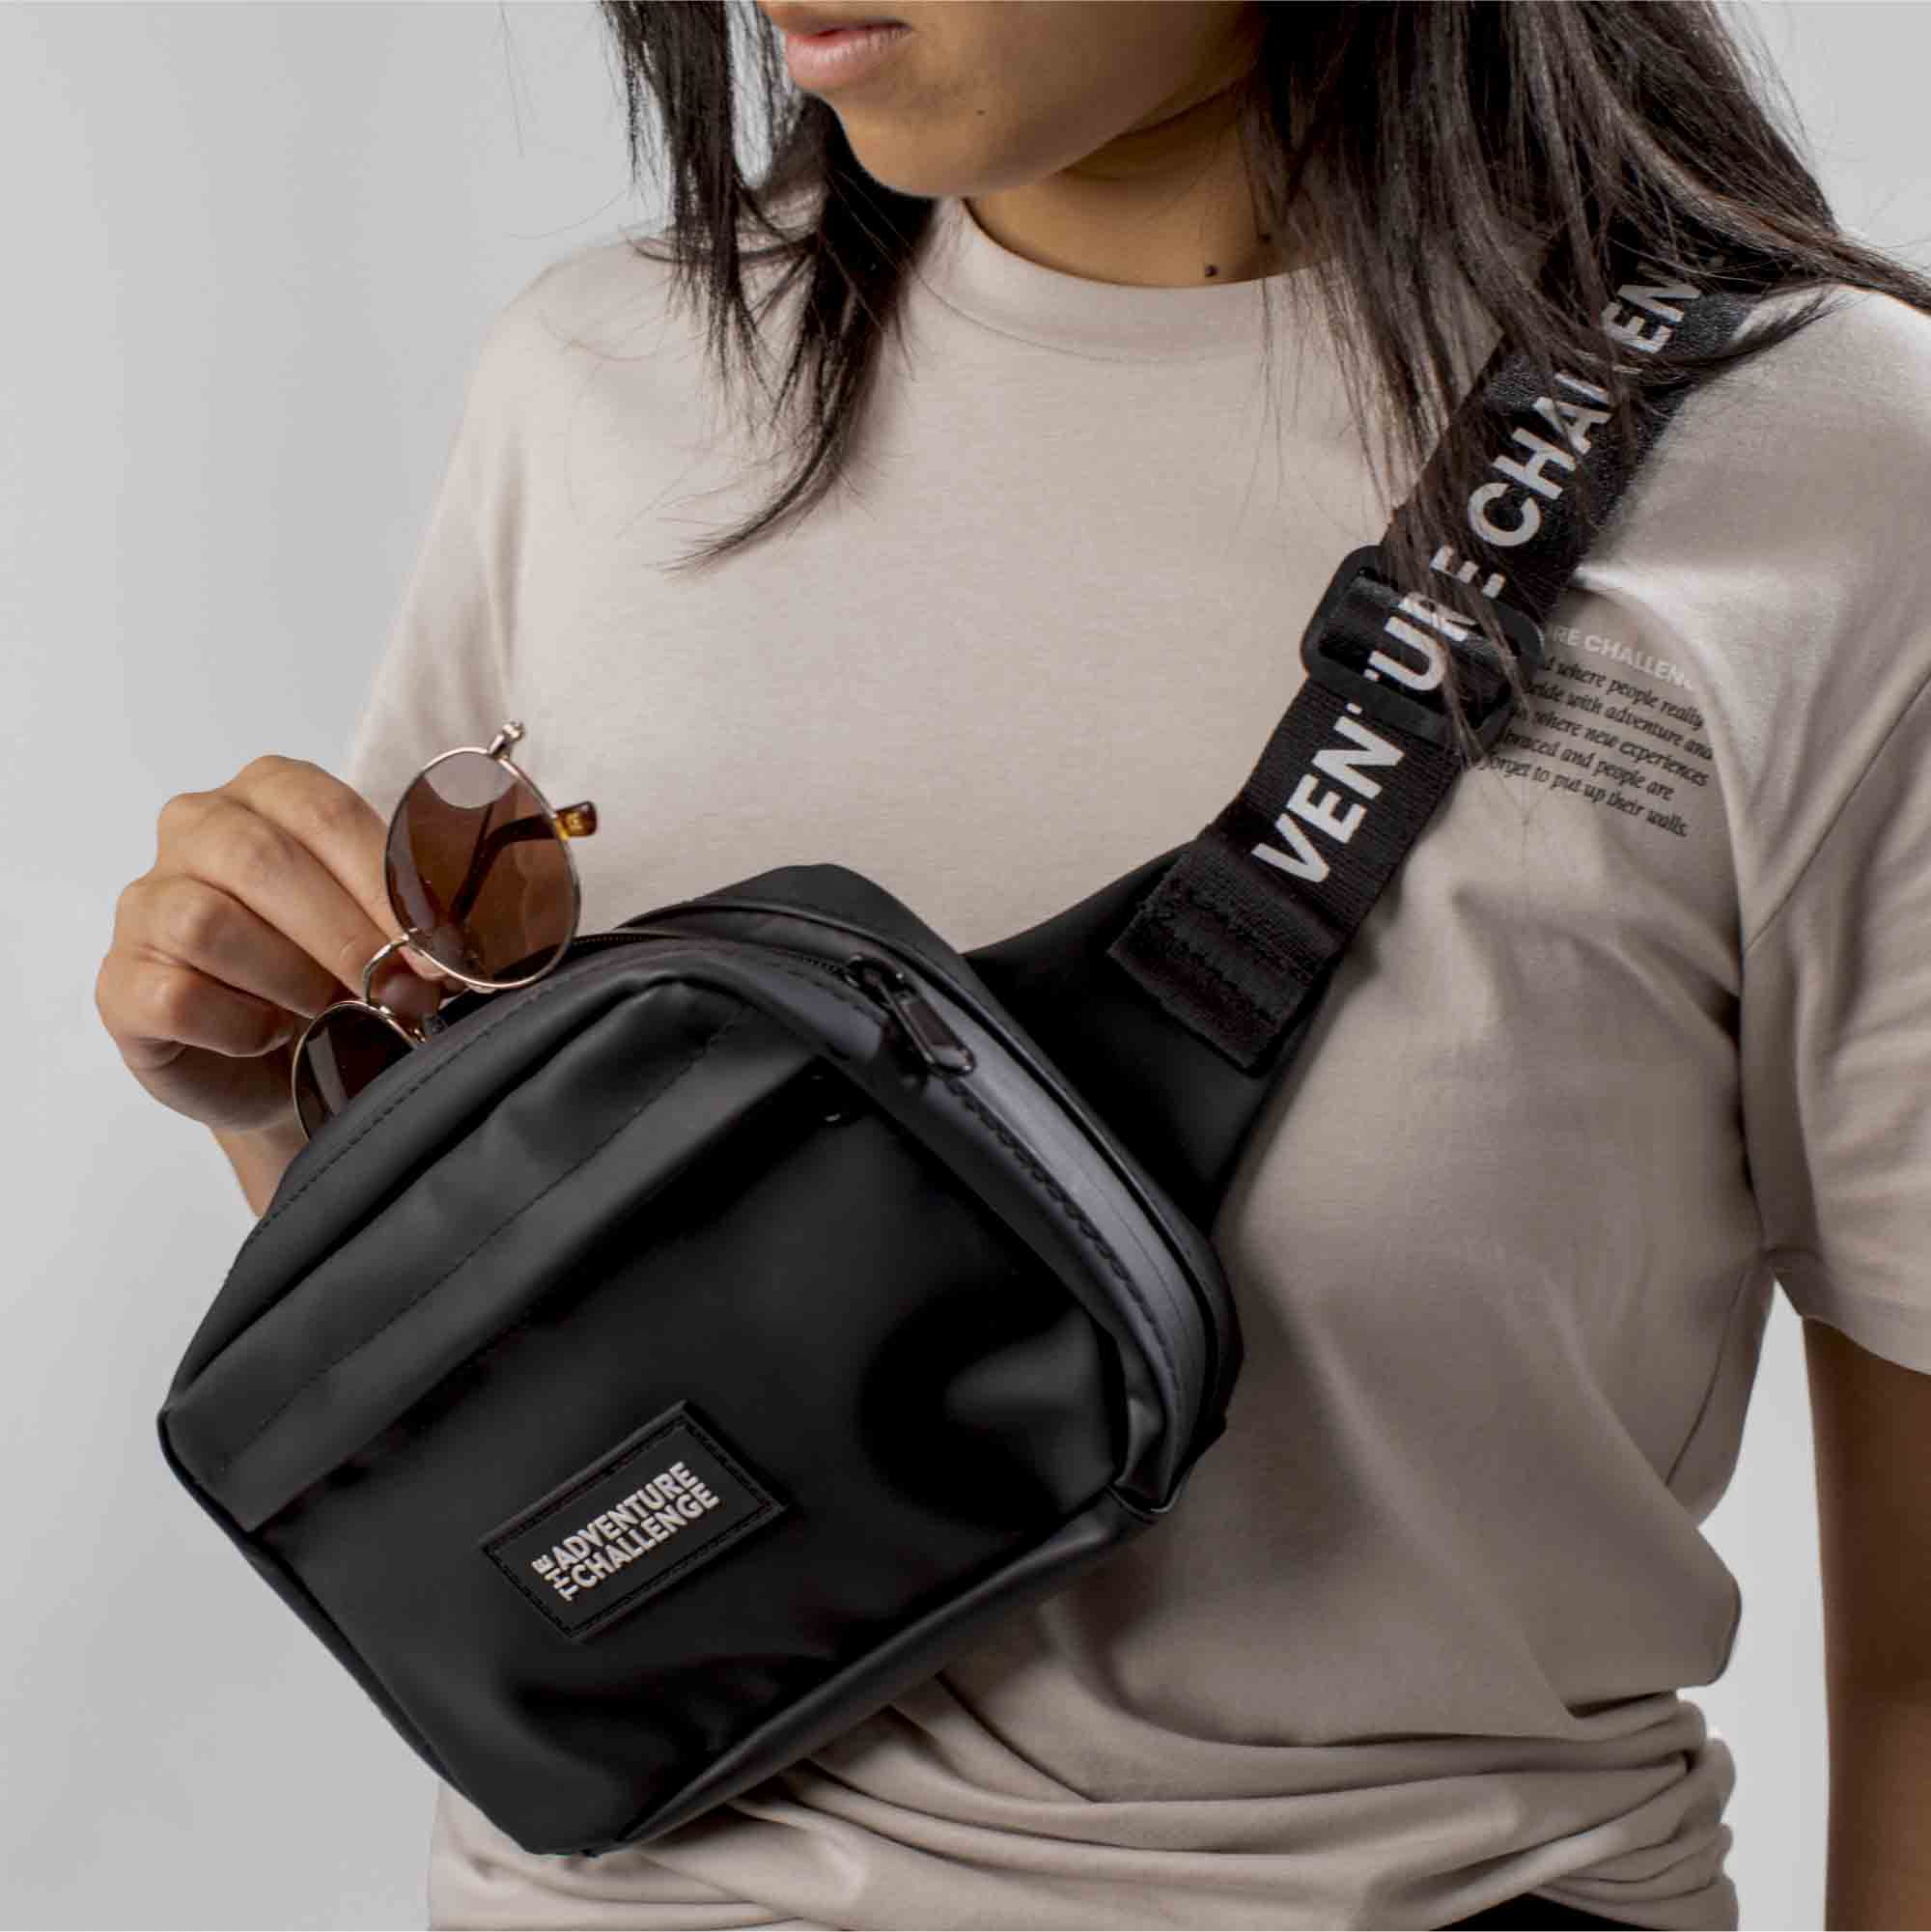 The Adventure Challenge Fanny Pack